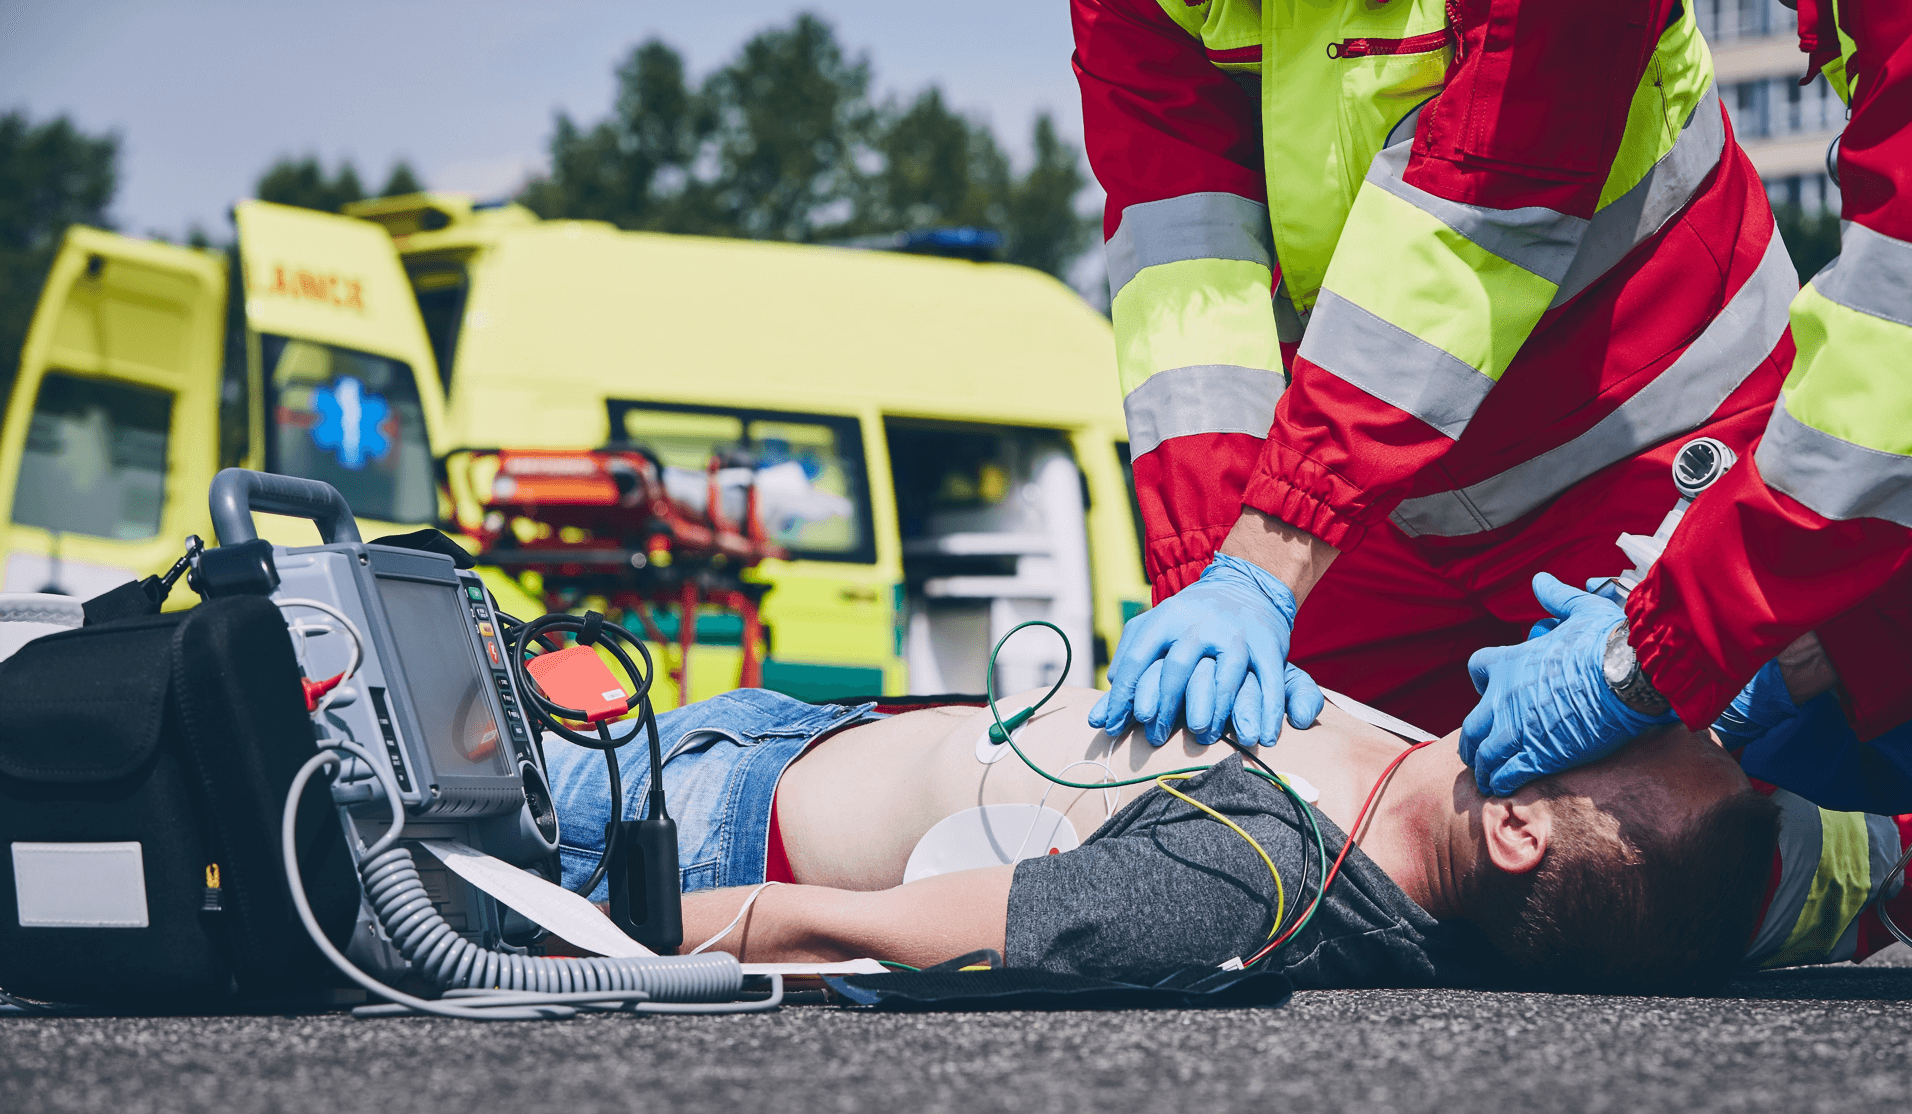 A person on the floor being treated by paramedics